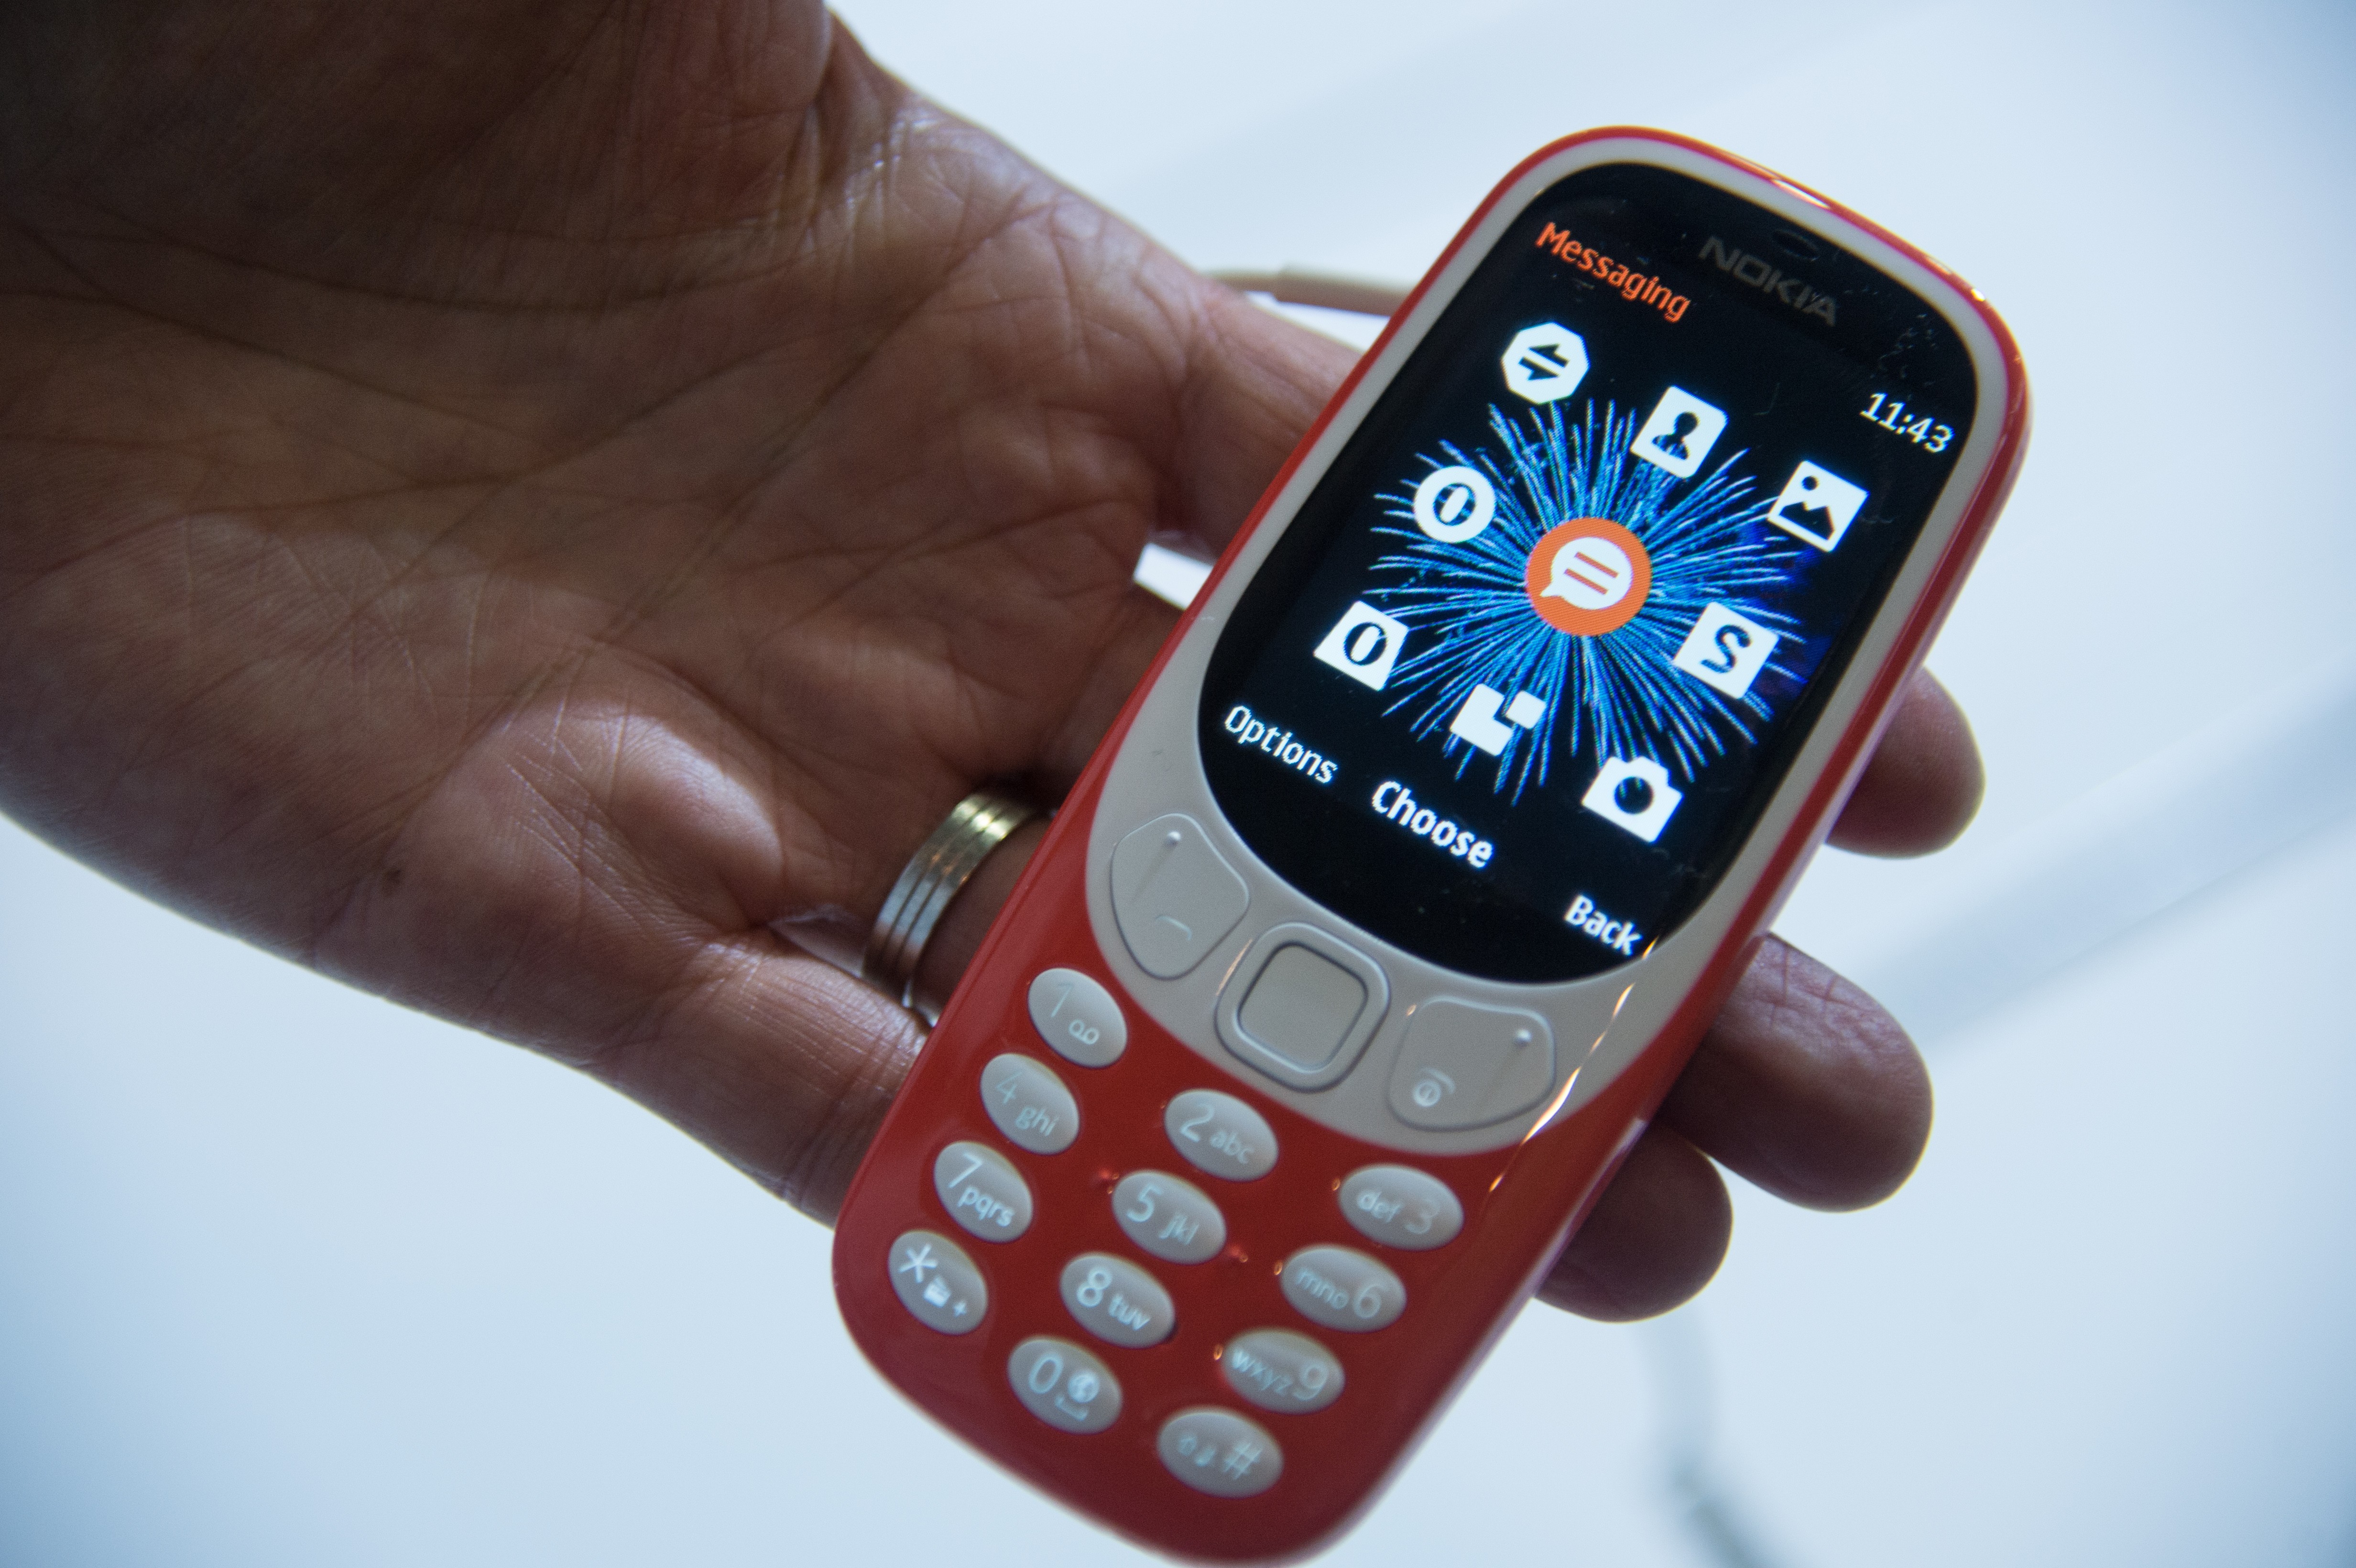 The Nokia 3310 at the Mobile World Congress in Barcelona. Photo: AFP